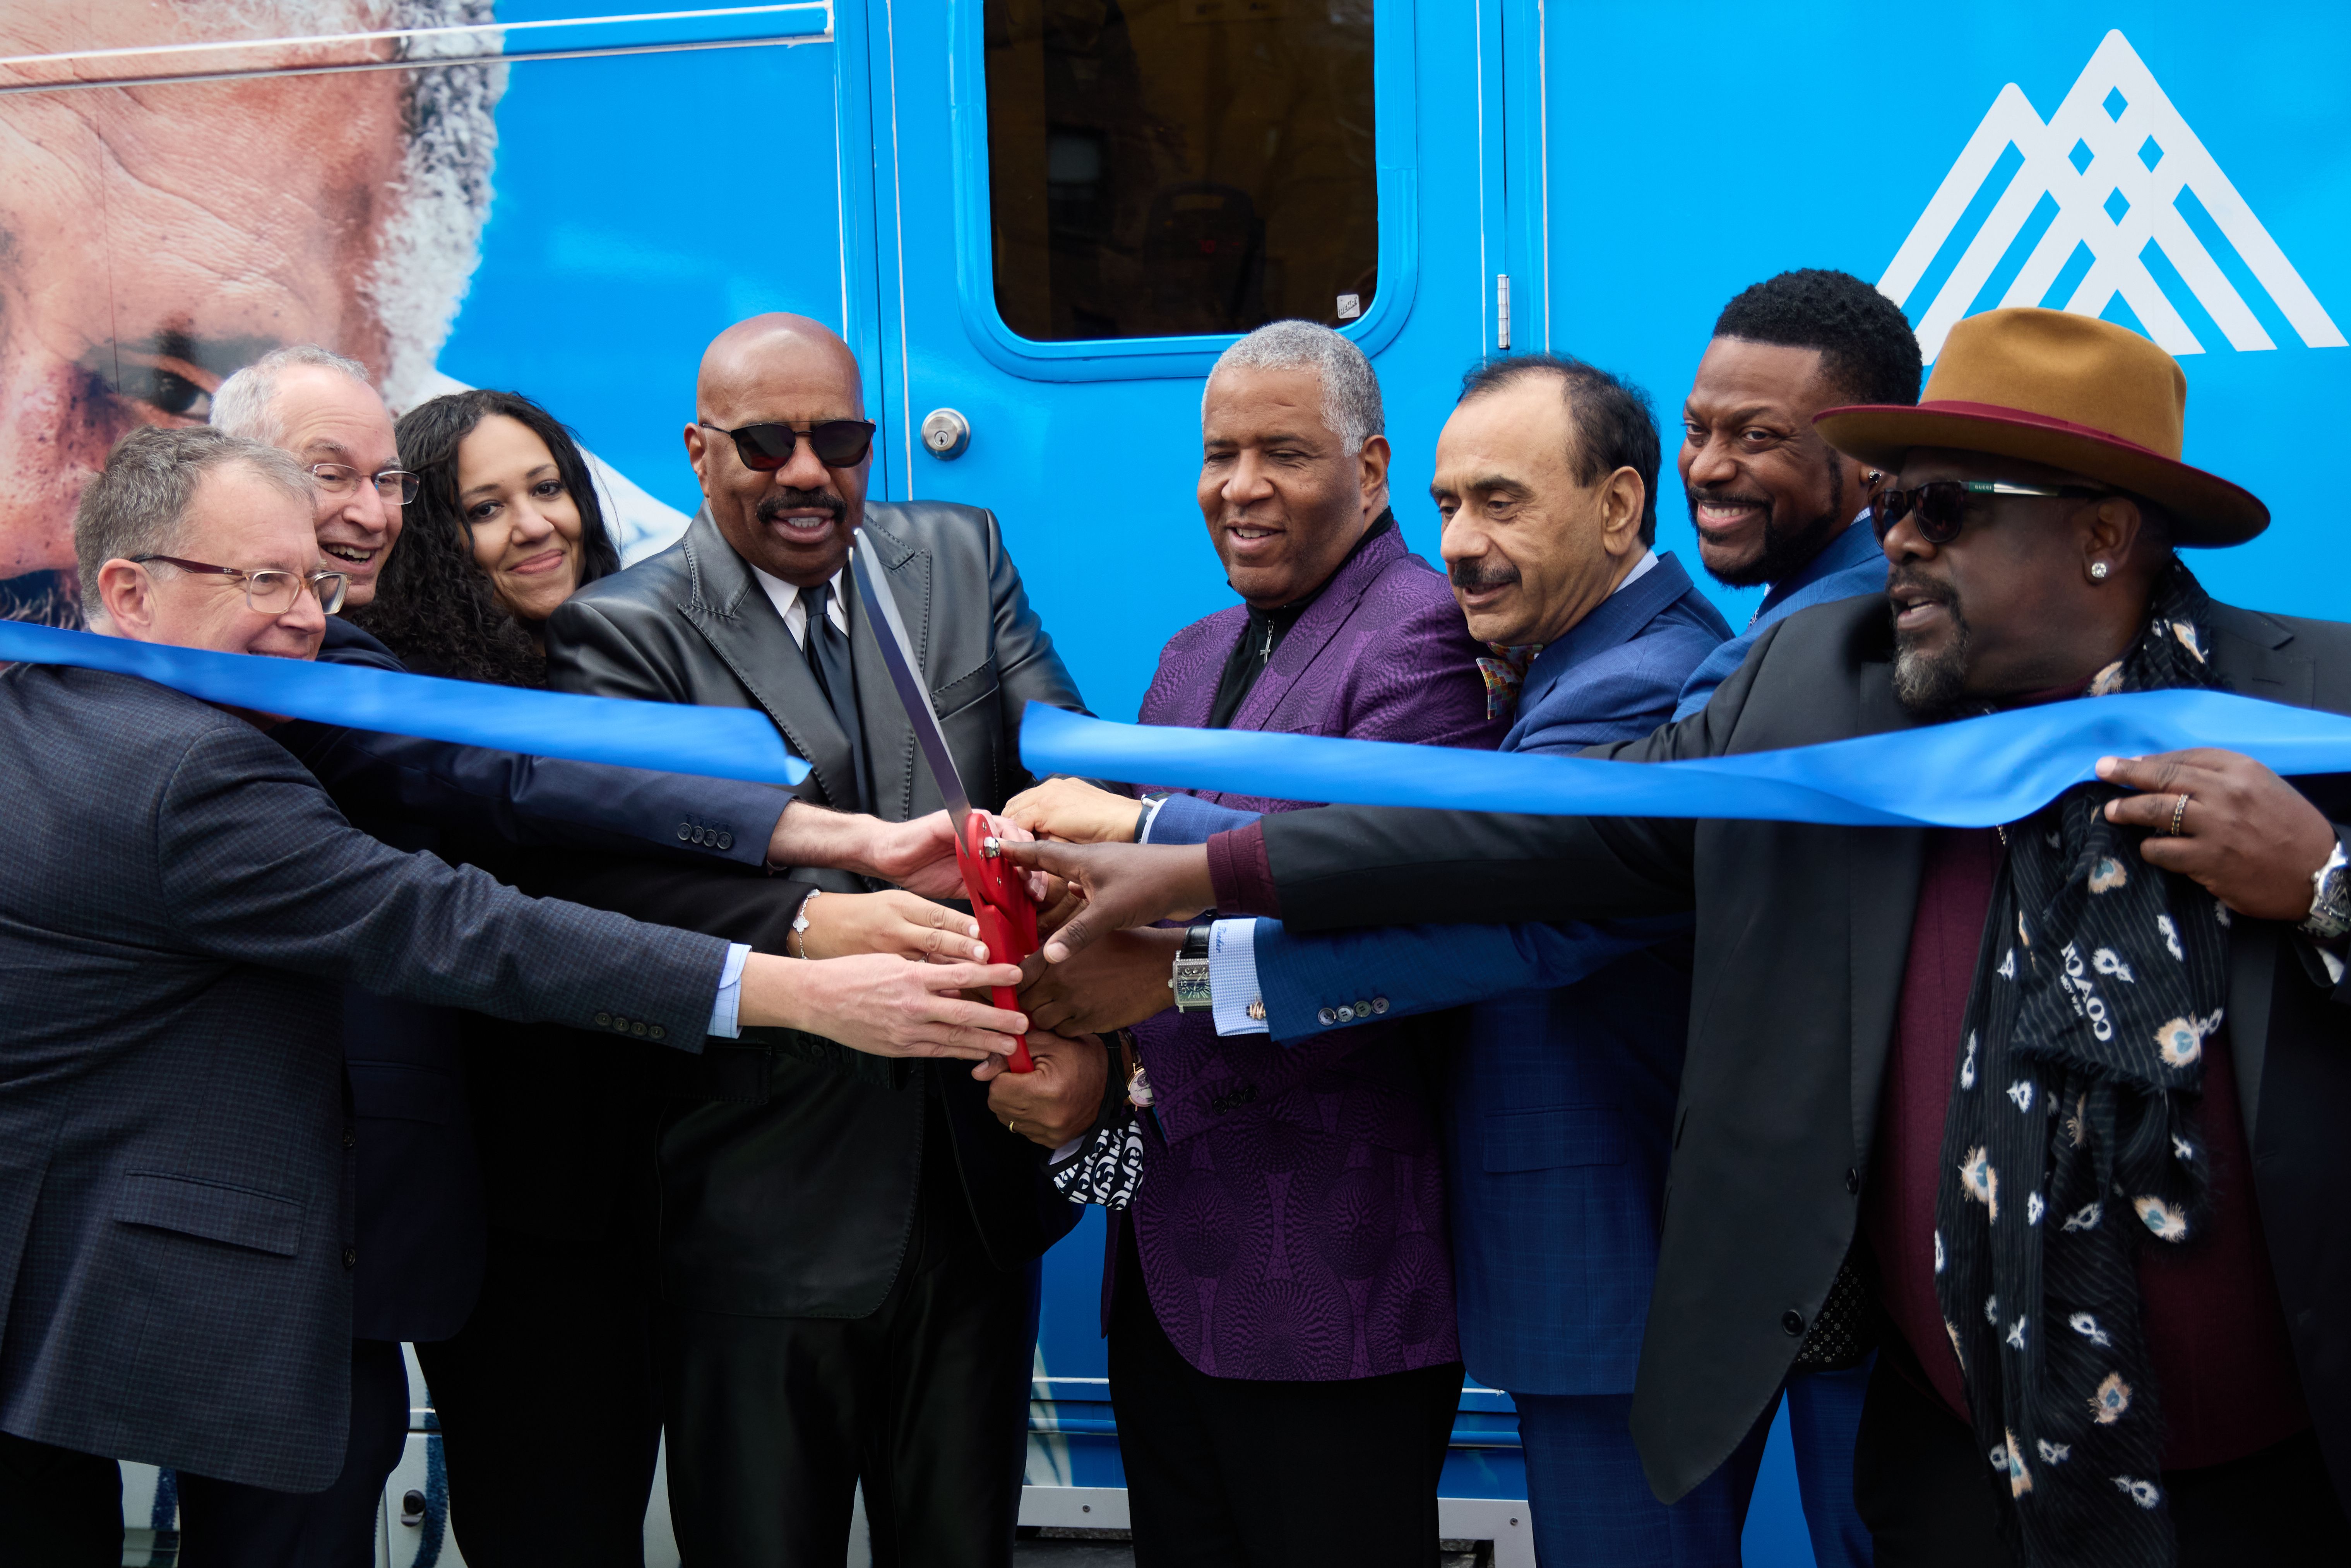 Robert F. Smith (center) joins Steve Harvey, Chris Tucker and Cedric the Entertainer and members of Mount Sinai Health System to cut the ribbon of the mobile prostate cancer screening unit.